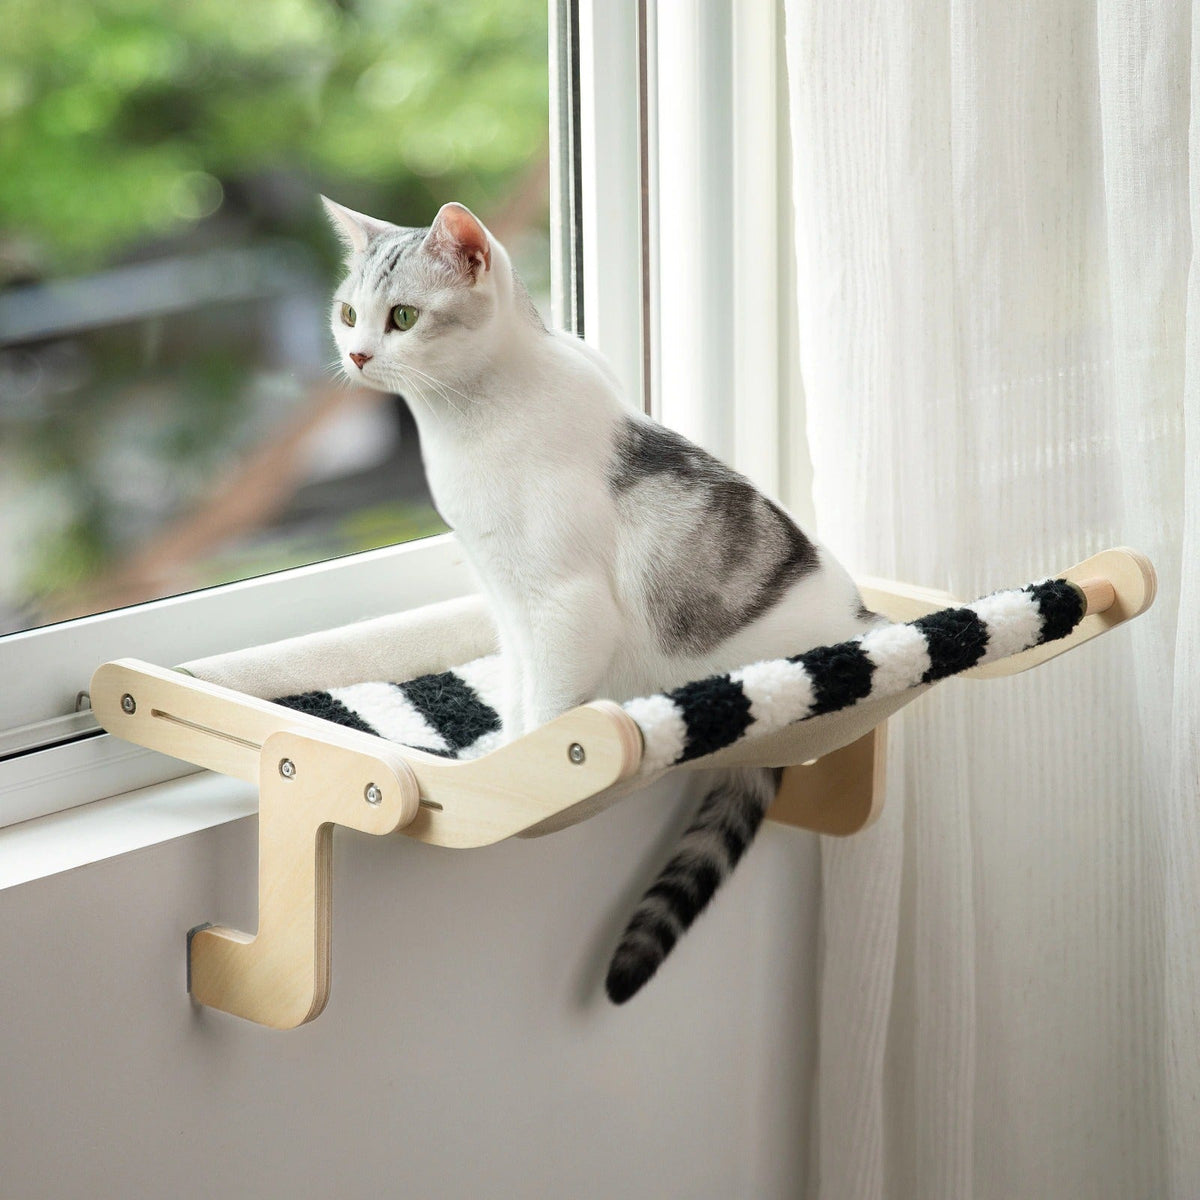 Cats sitting stand